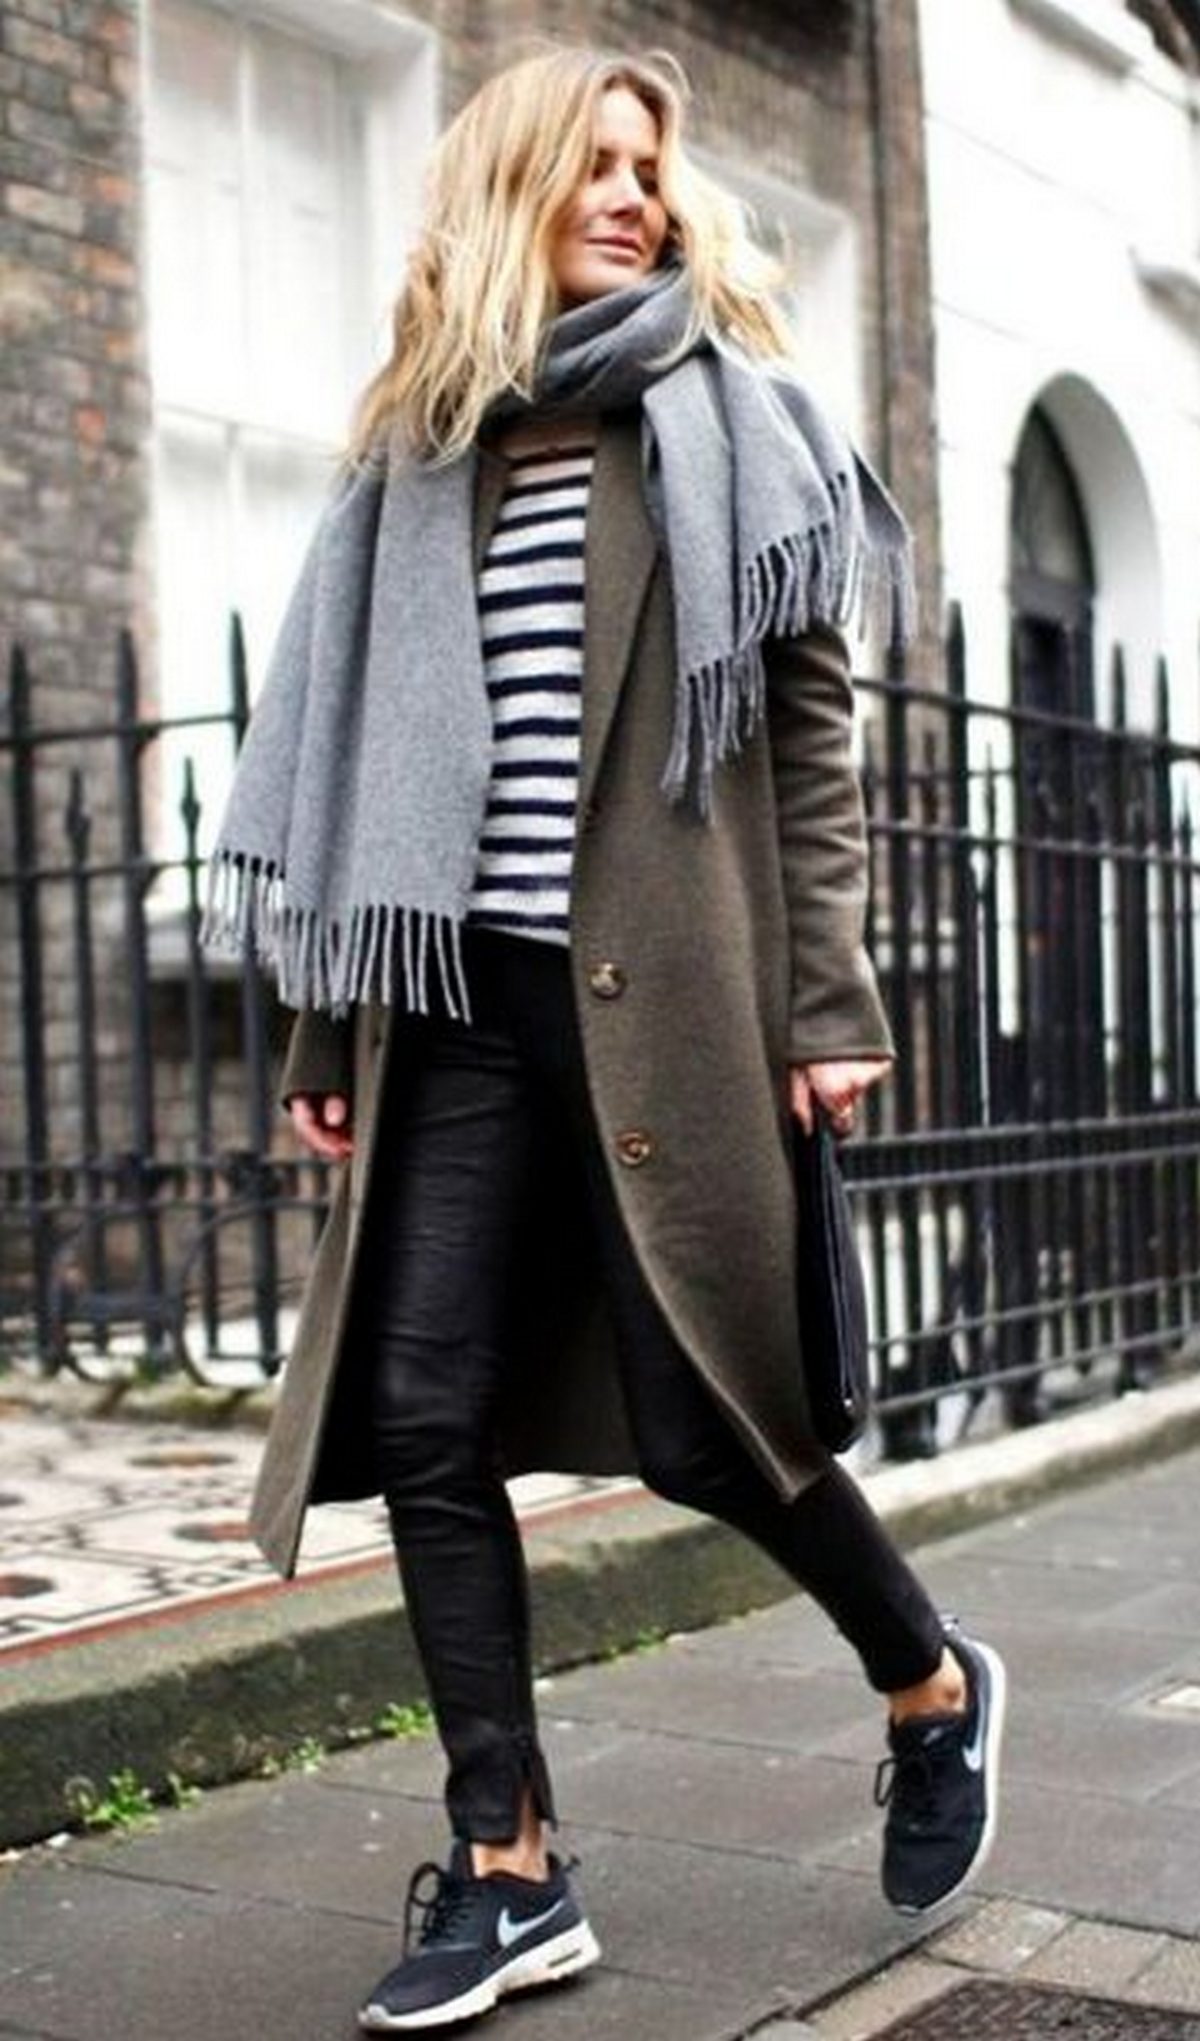 Leggings, Striped Top, Overcoat With Large Scarf, And Nike Shoes 